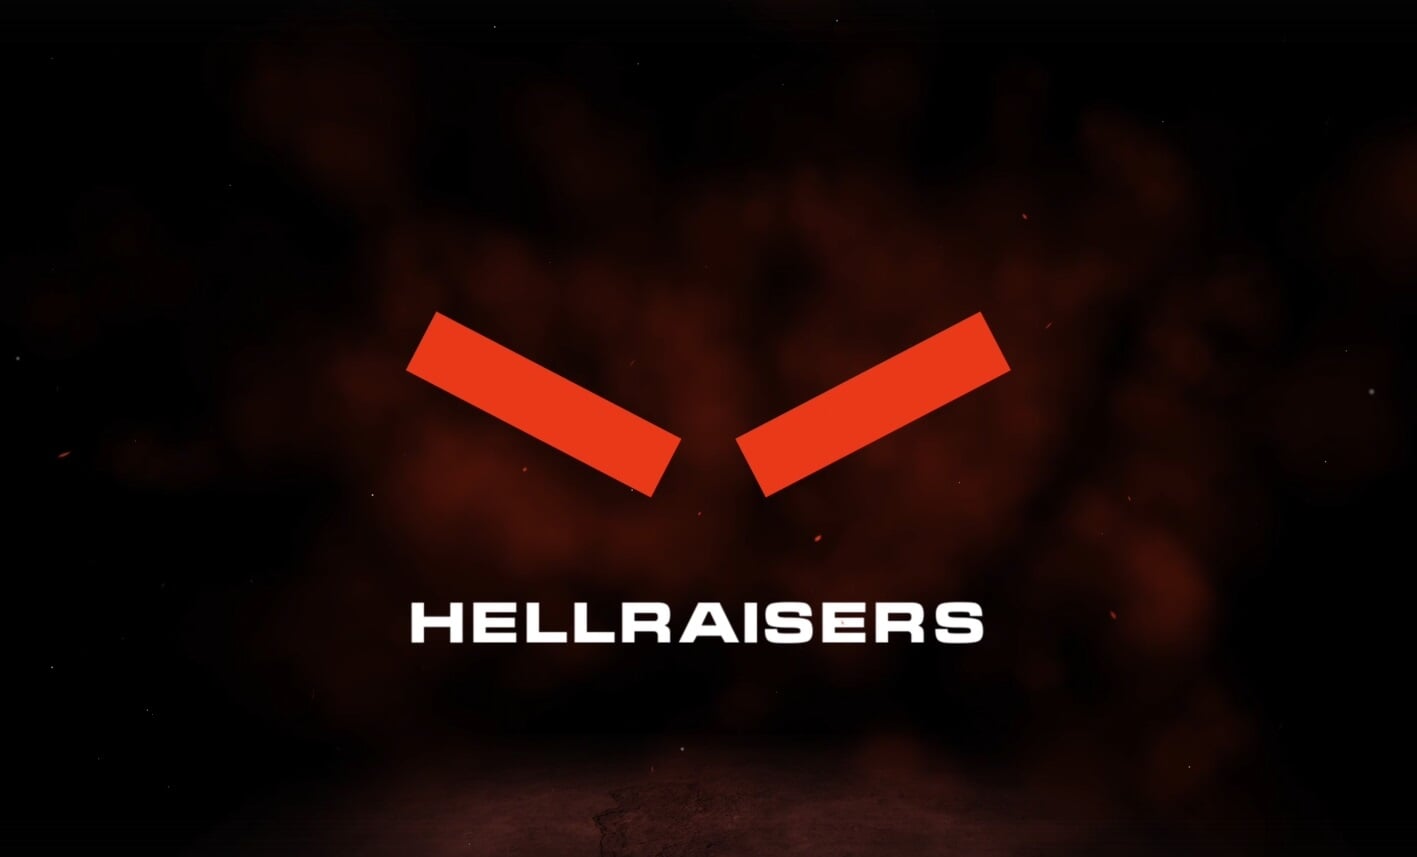 Hellraisers will compete in 2022